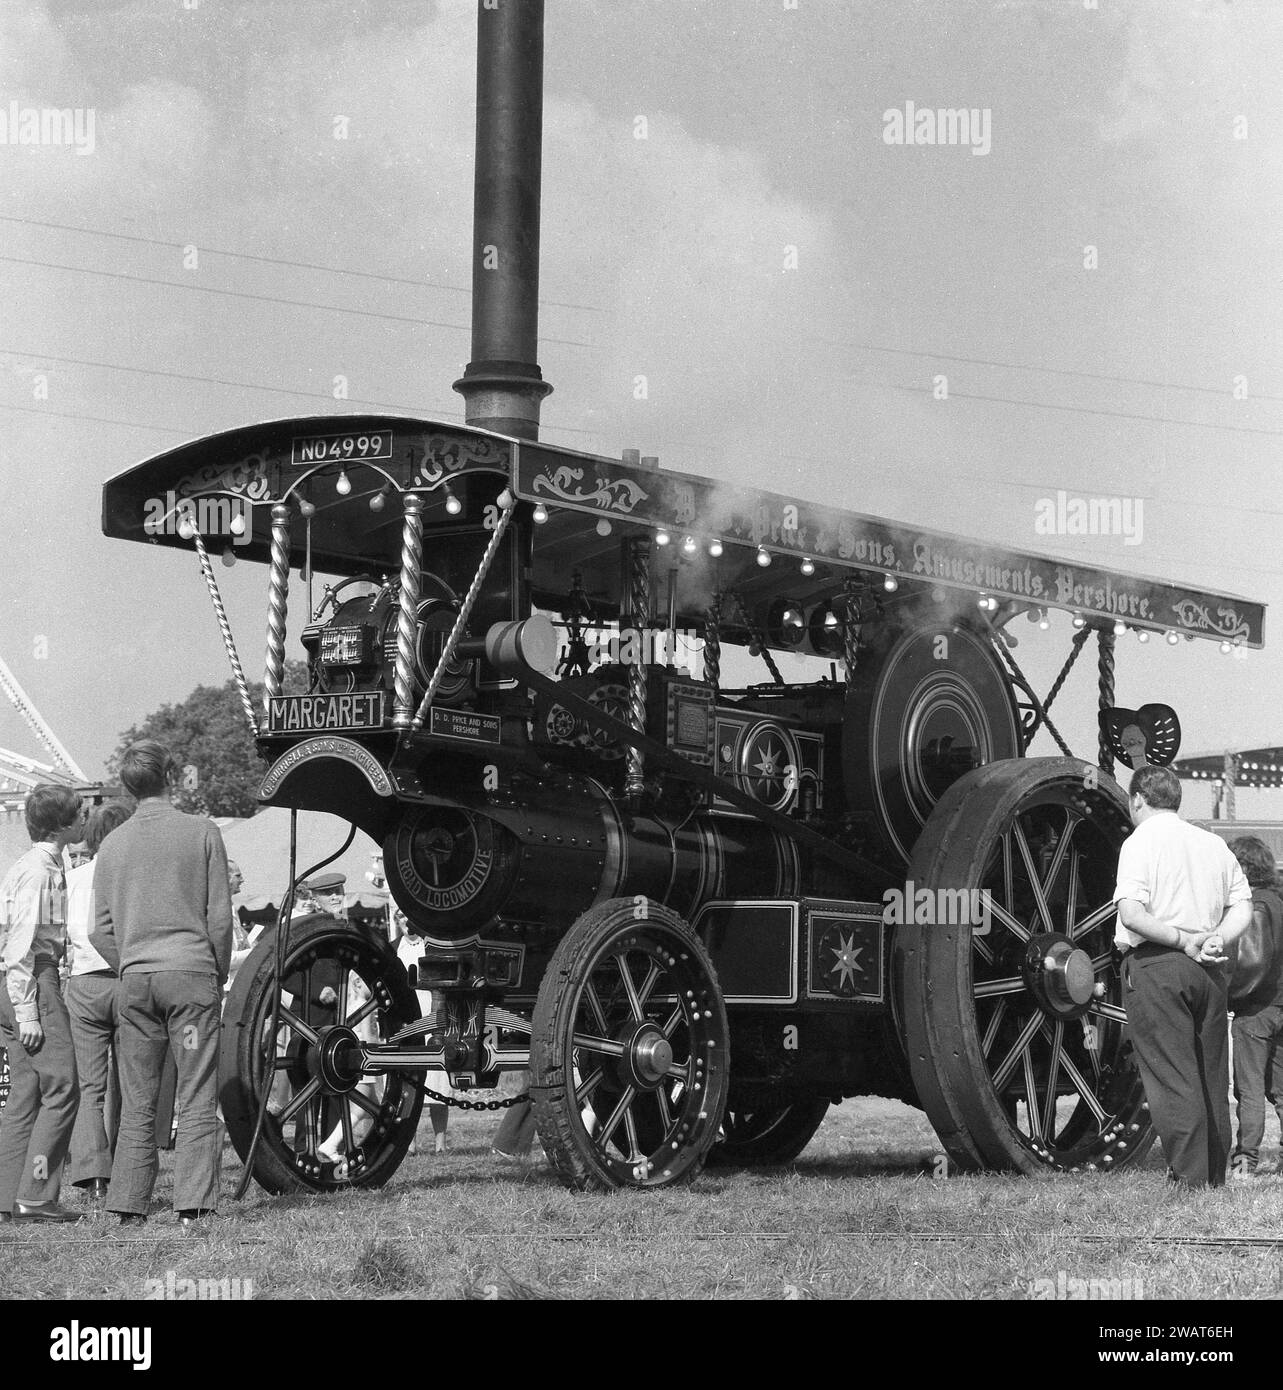 1970, historical, outside at a steam fair, visitors looking at the steam engine, 'Margaret', England, UK, built in 1922 and known as a Showmans Road Locomotive.  Maker's nameplate on front; C. Burrell & Sons Ltd, England. Number plate is NO 4999. Founded in 1770 and based at Thetford, Norfolk, Charles Burrell & Sons were leading builders of steam traction engines and related machinery and traded until the late 1920s, when the internal combustion engine became a more effective alternative to steam power. Stock Photo